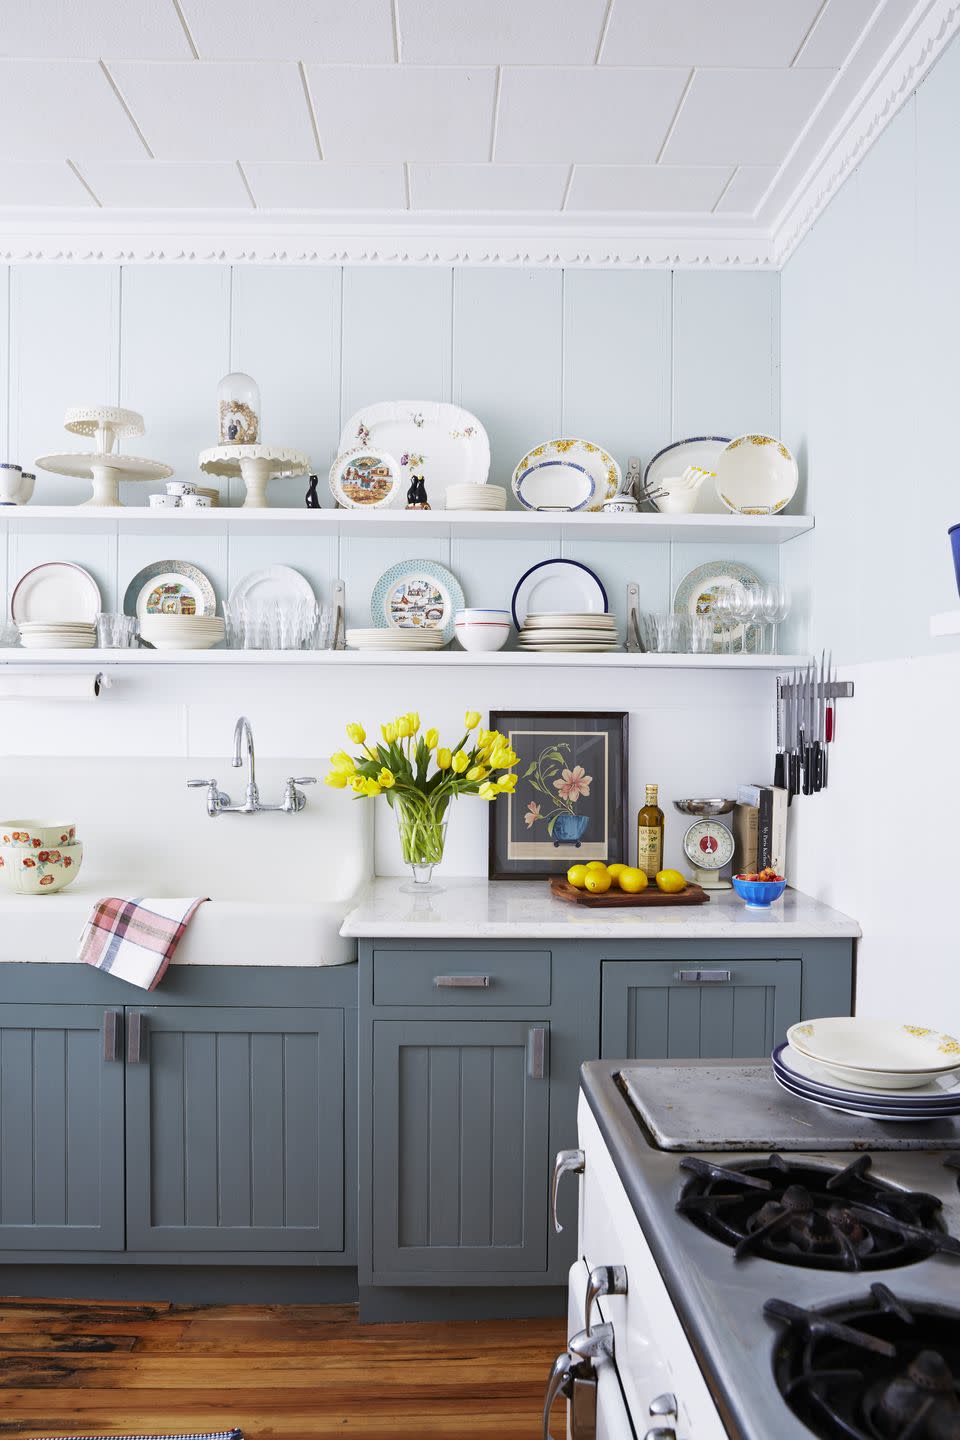 farmhouse kitchen with dark gray blue color on cabinets and pale blue color on walls